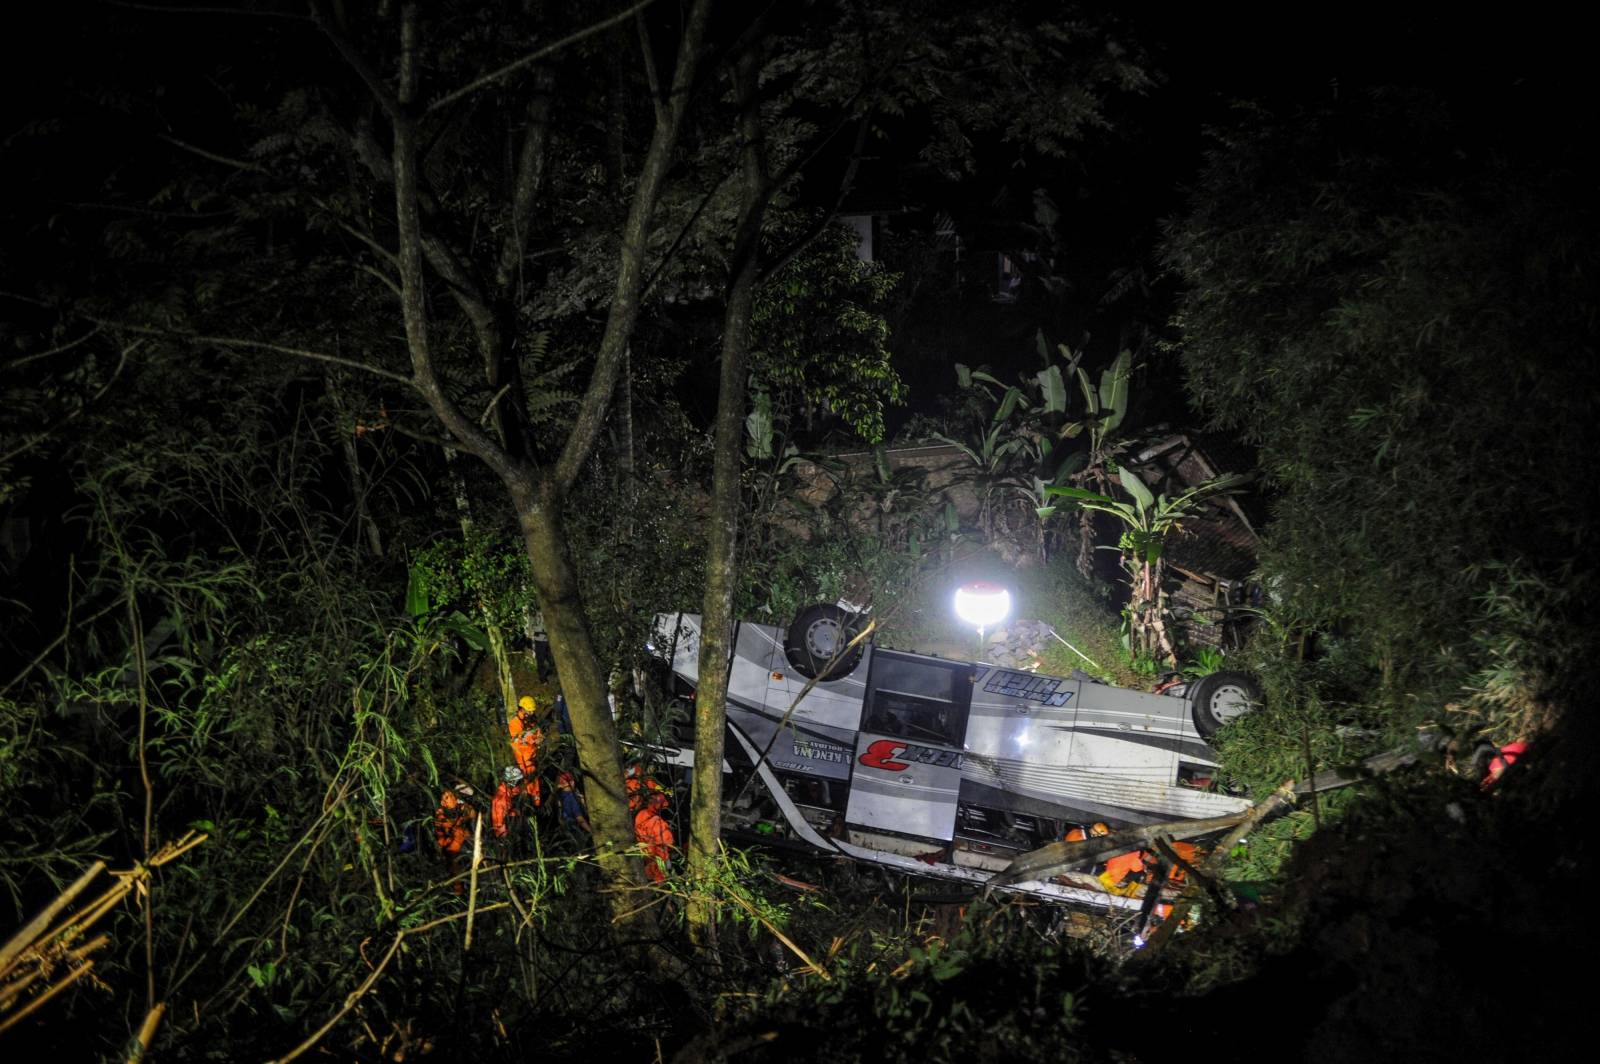 Rescue personnel work at the crash site after a bus fell into a ravine in Sumedang, Indonesia